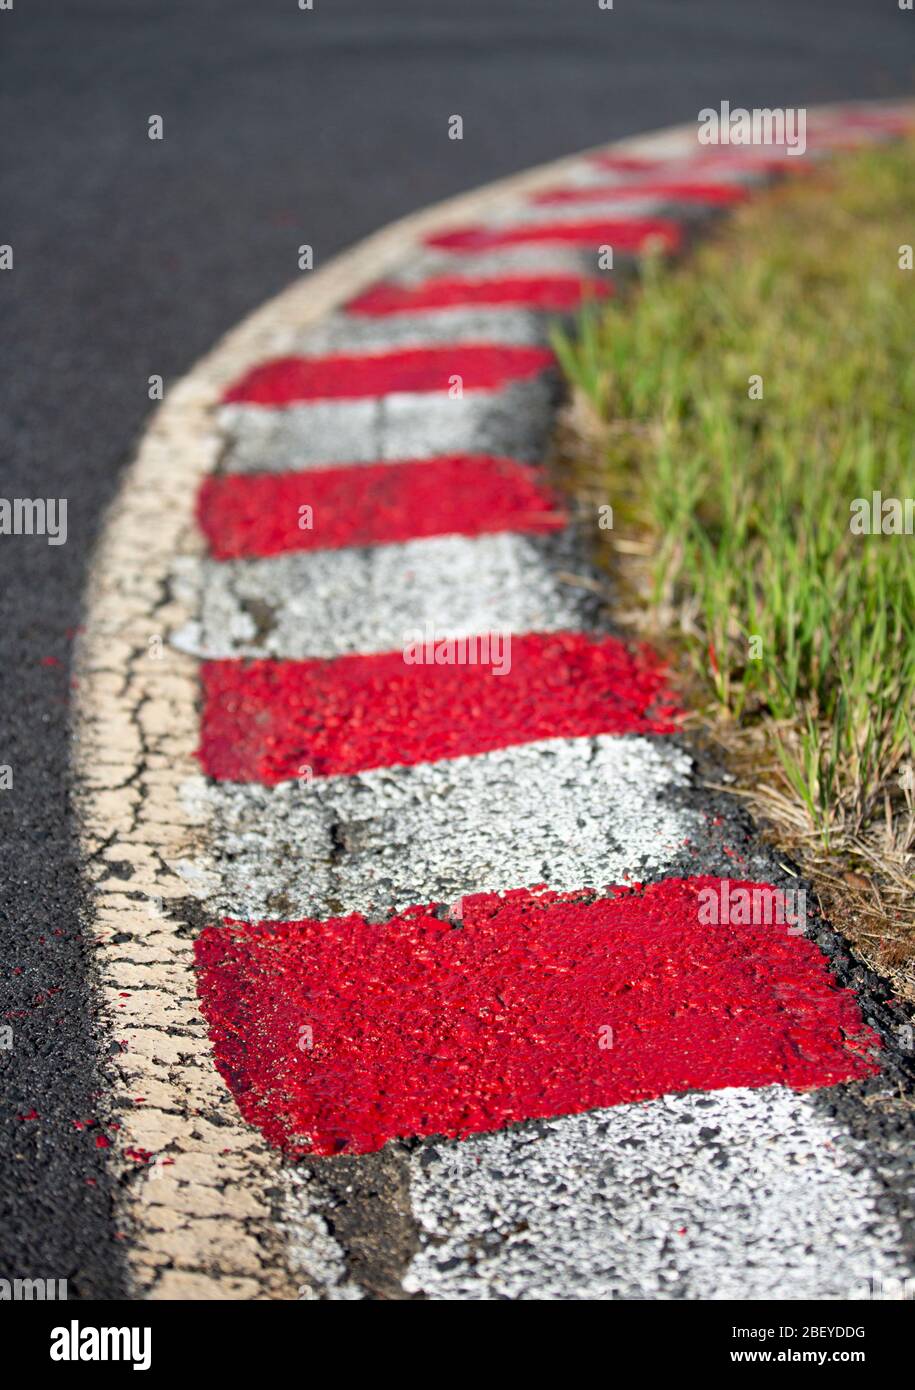 Red and white painted race kerbs at carting race track Stock Photo